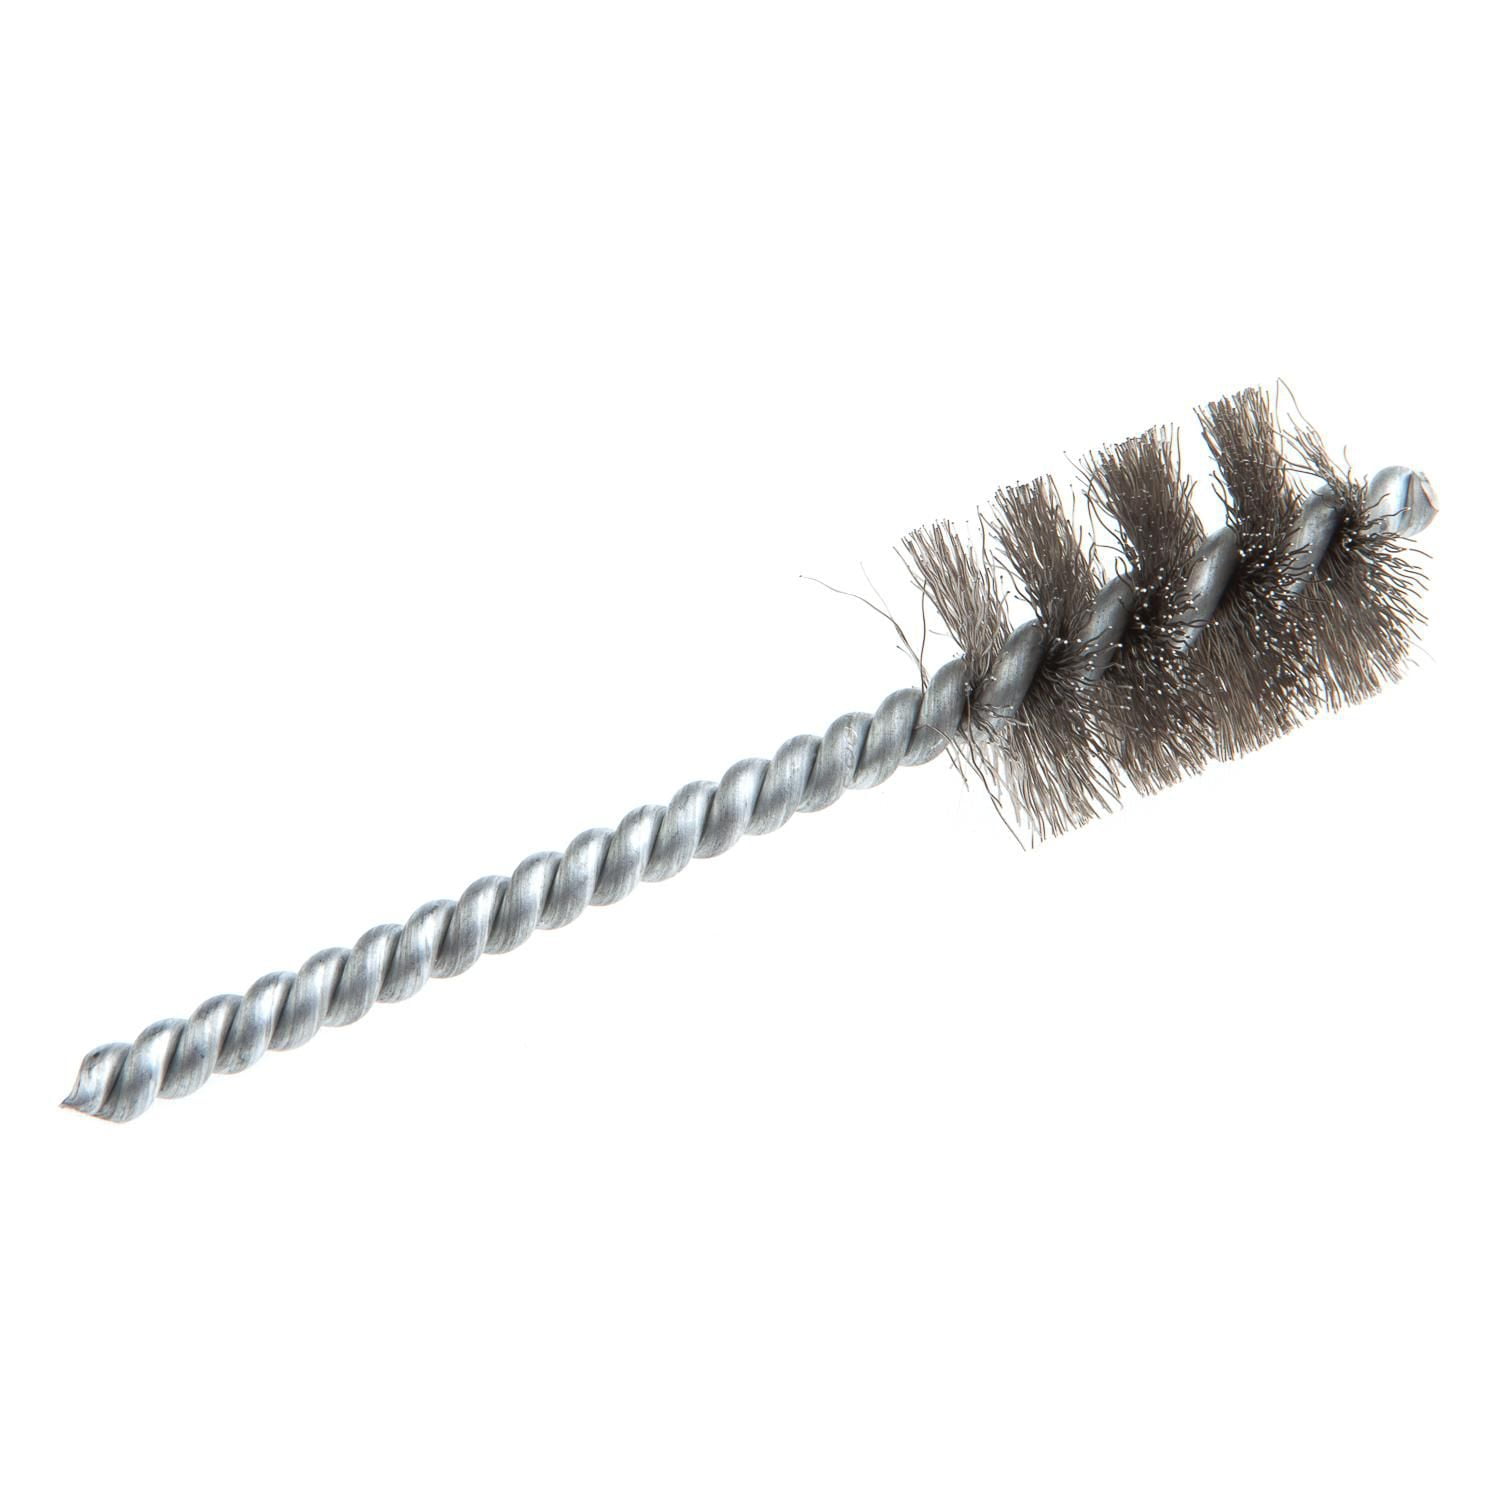 4 x 0.75 in. Power Tube Cleaning Brush, Stainless Steel -  Vortex, VO1676094